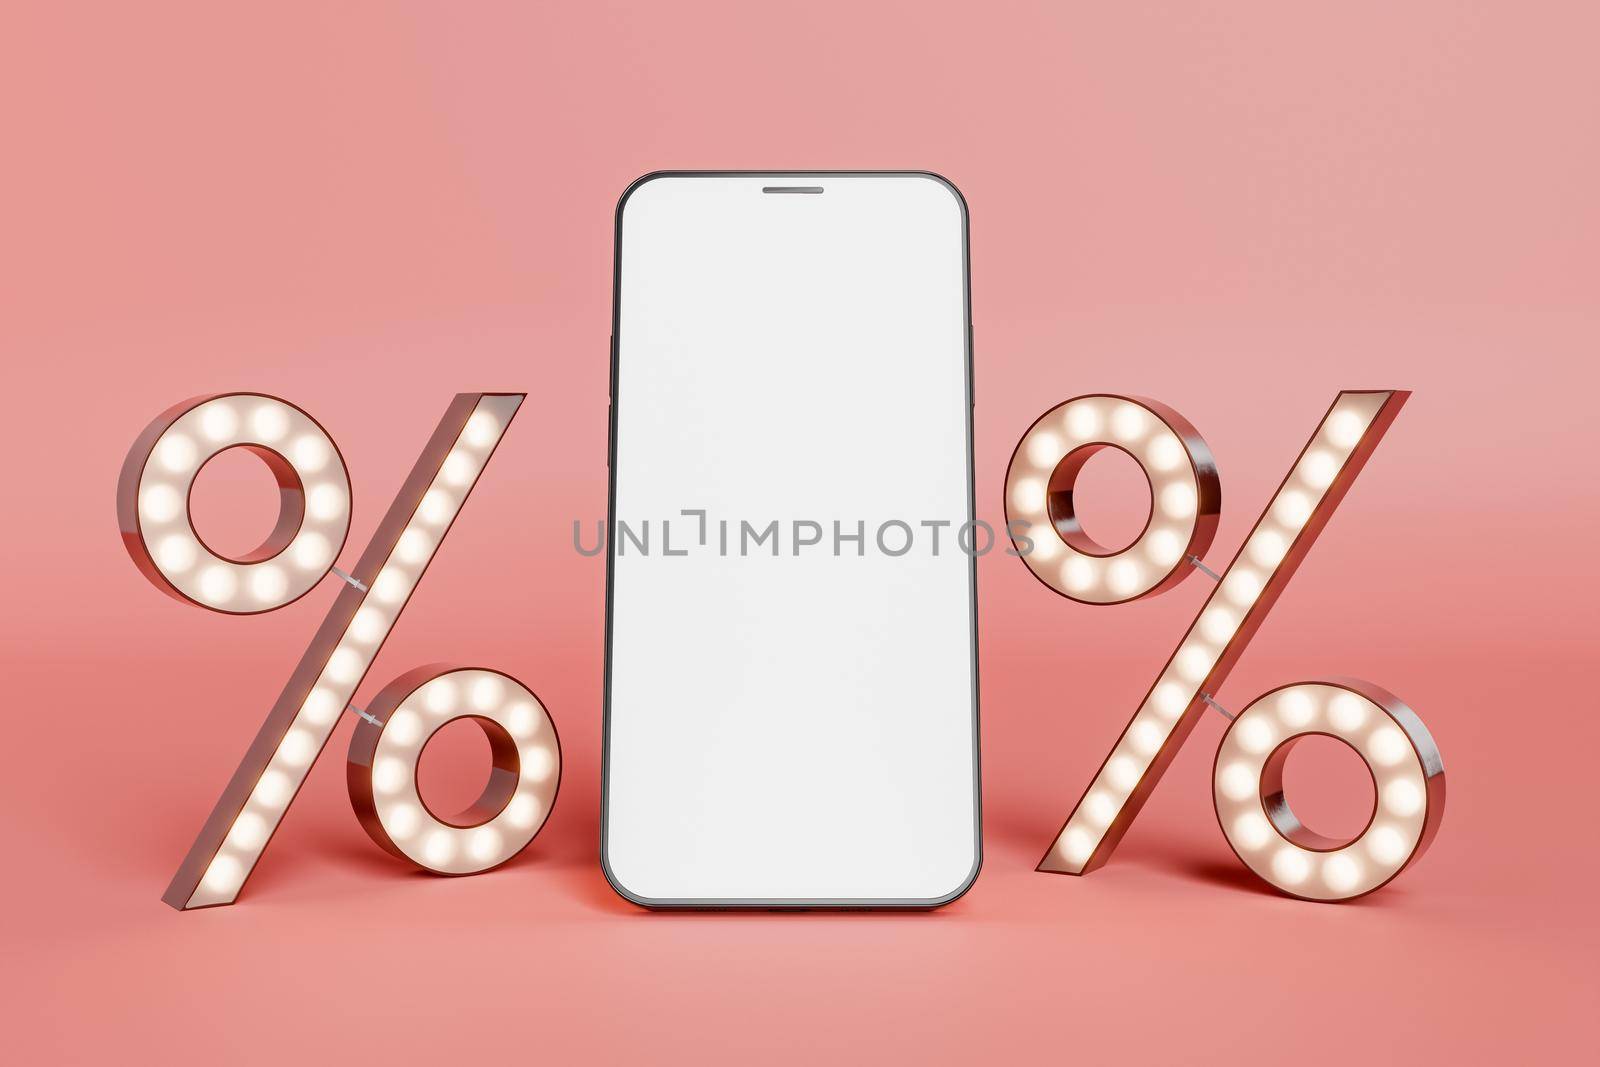 mobile phone with empty screen and luminous sale symbols on the sides. e-commerce concept, online shopping, drop shipping and offers. 3d rendering